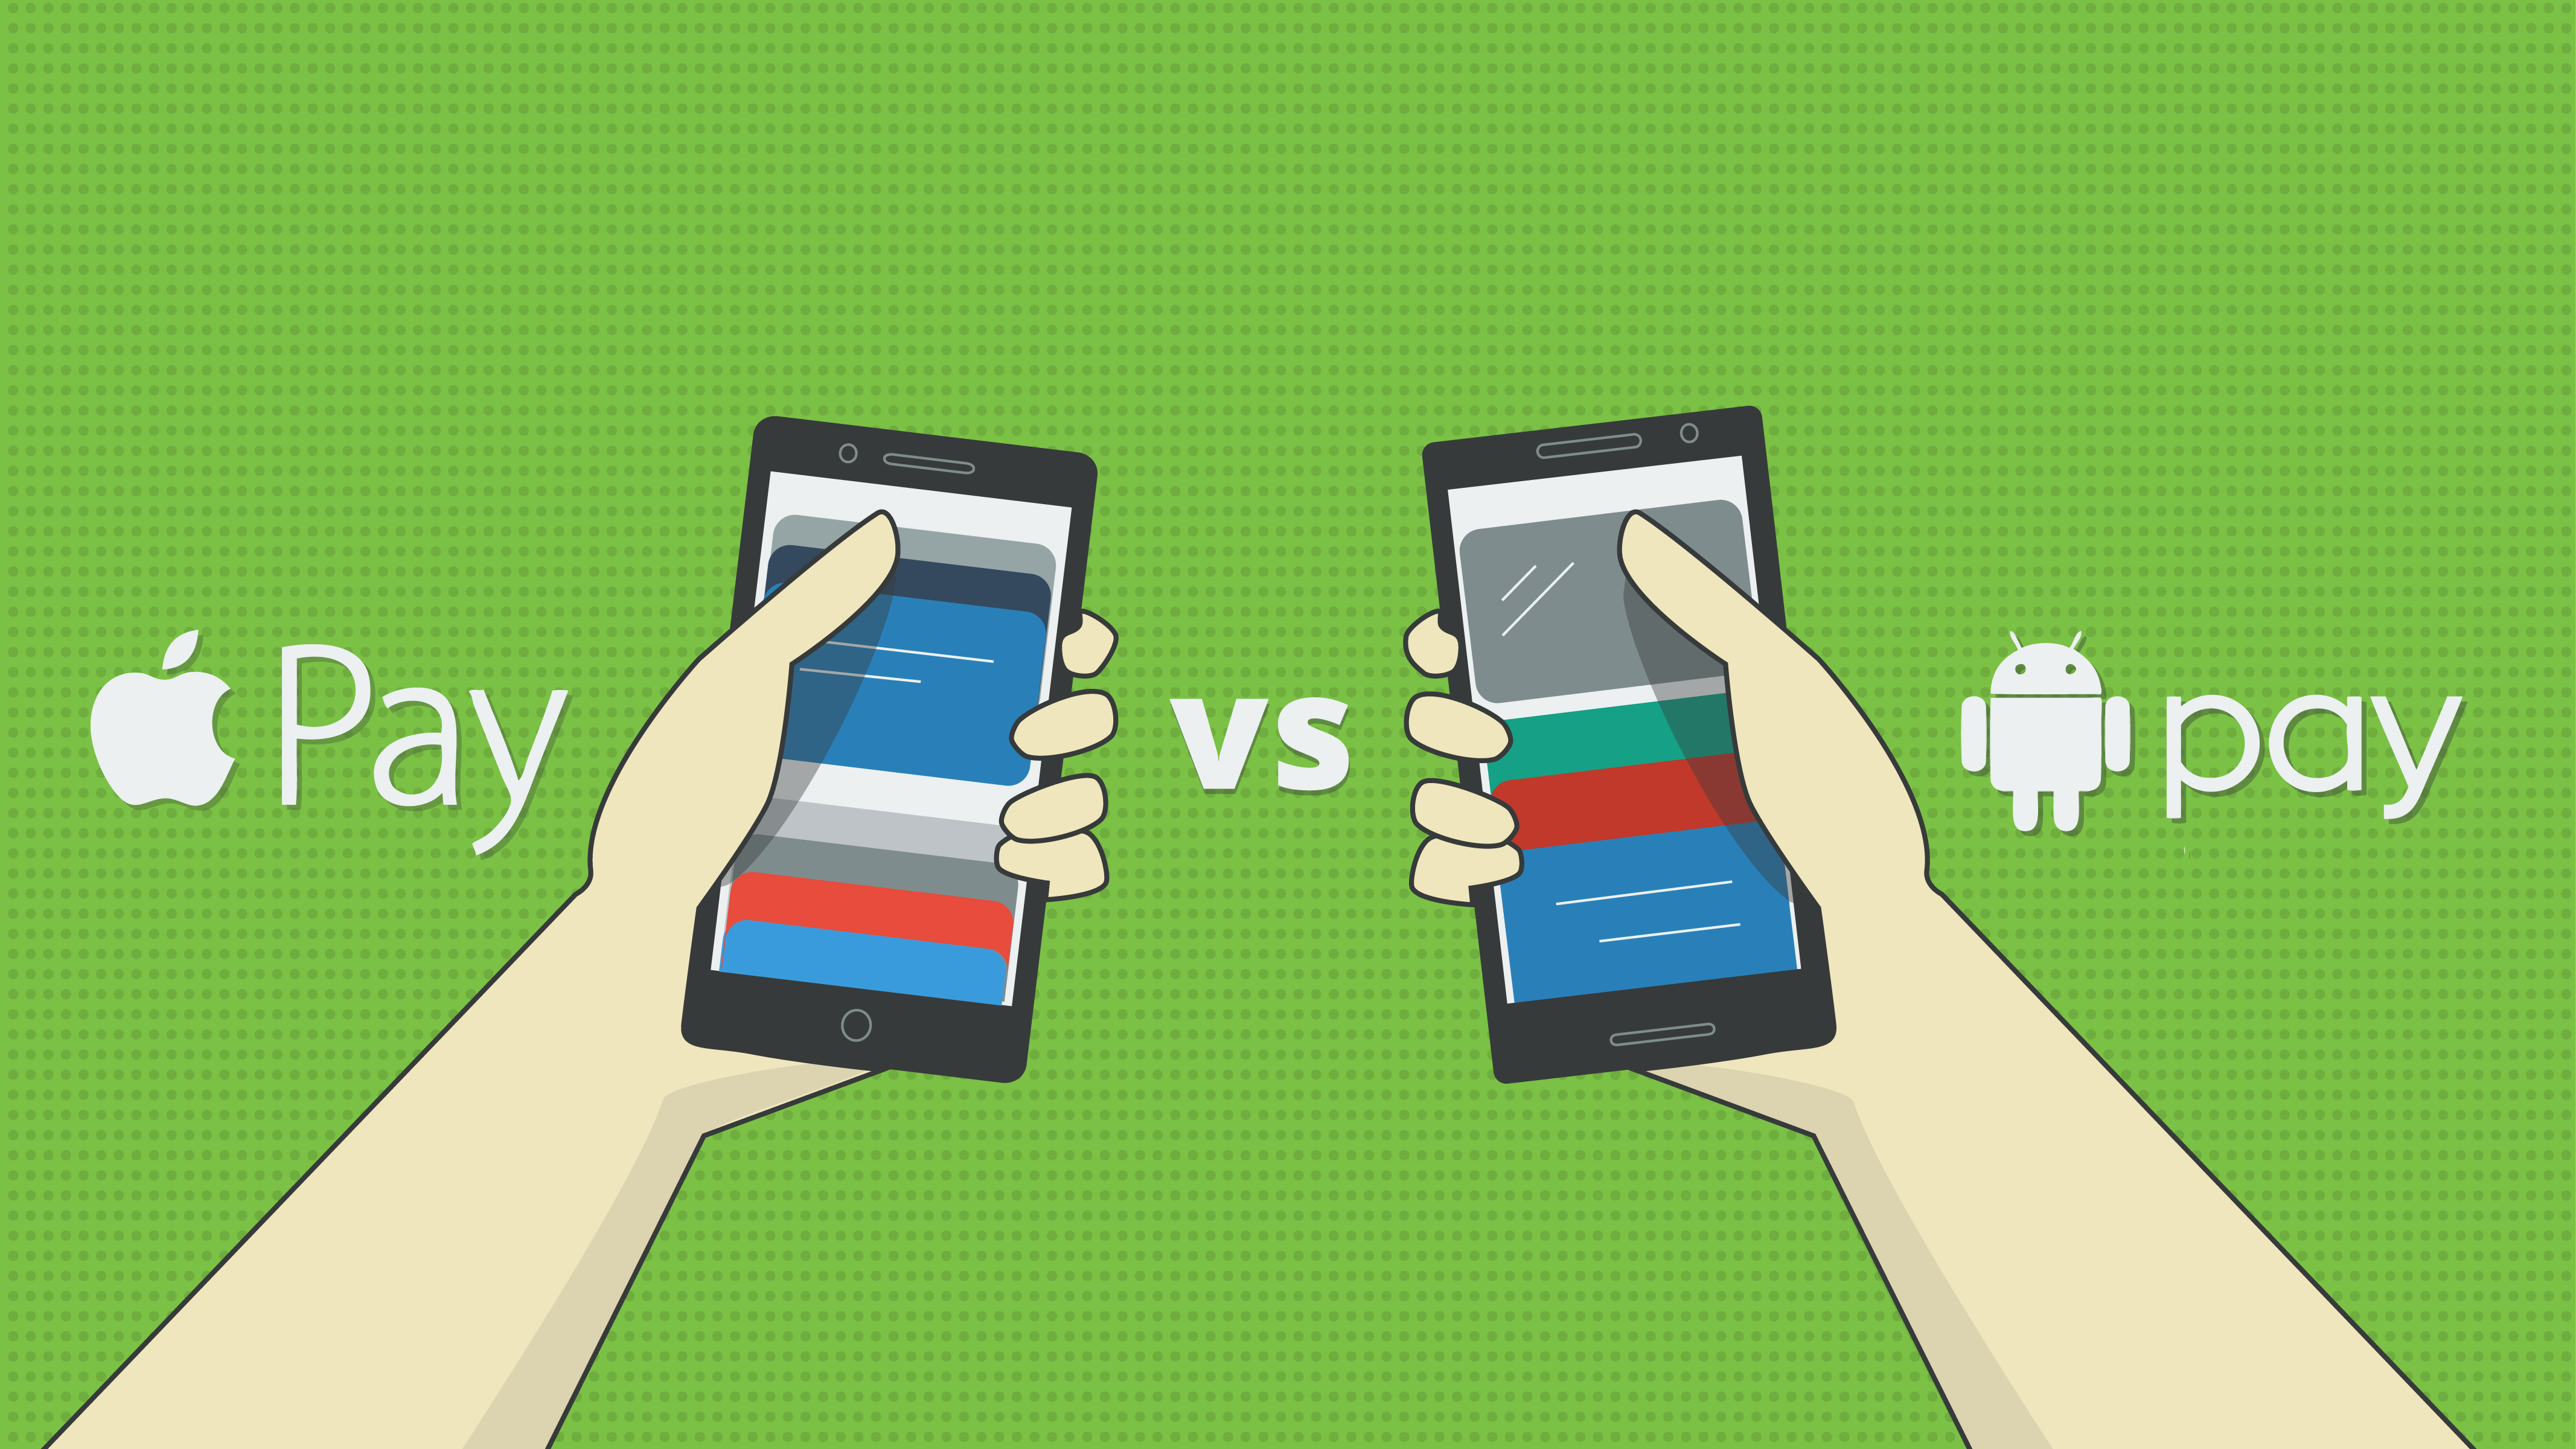 Apple Pay vs. Android Pay